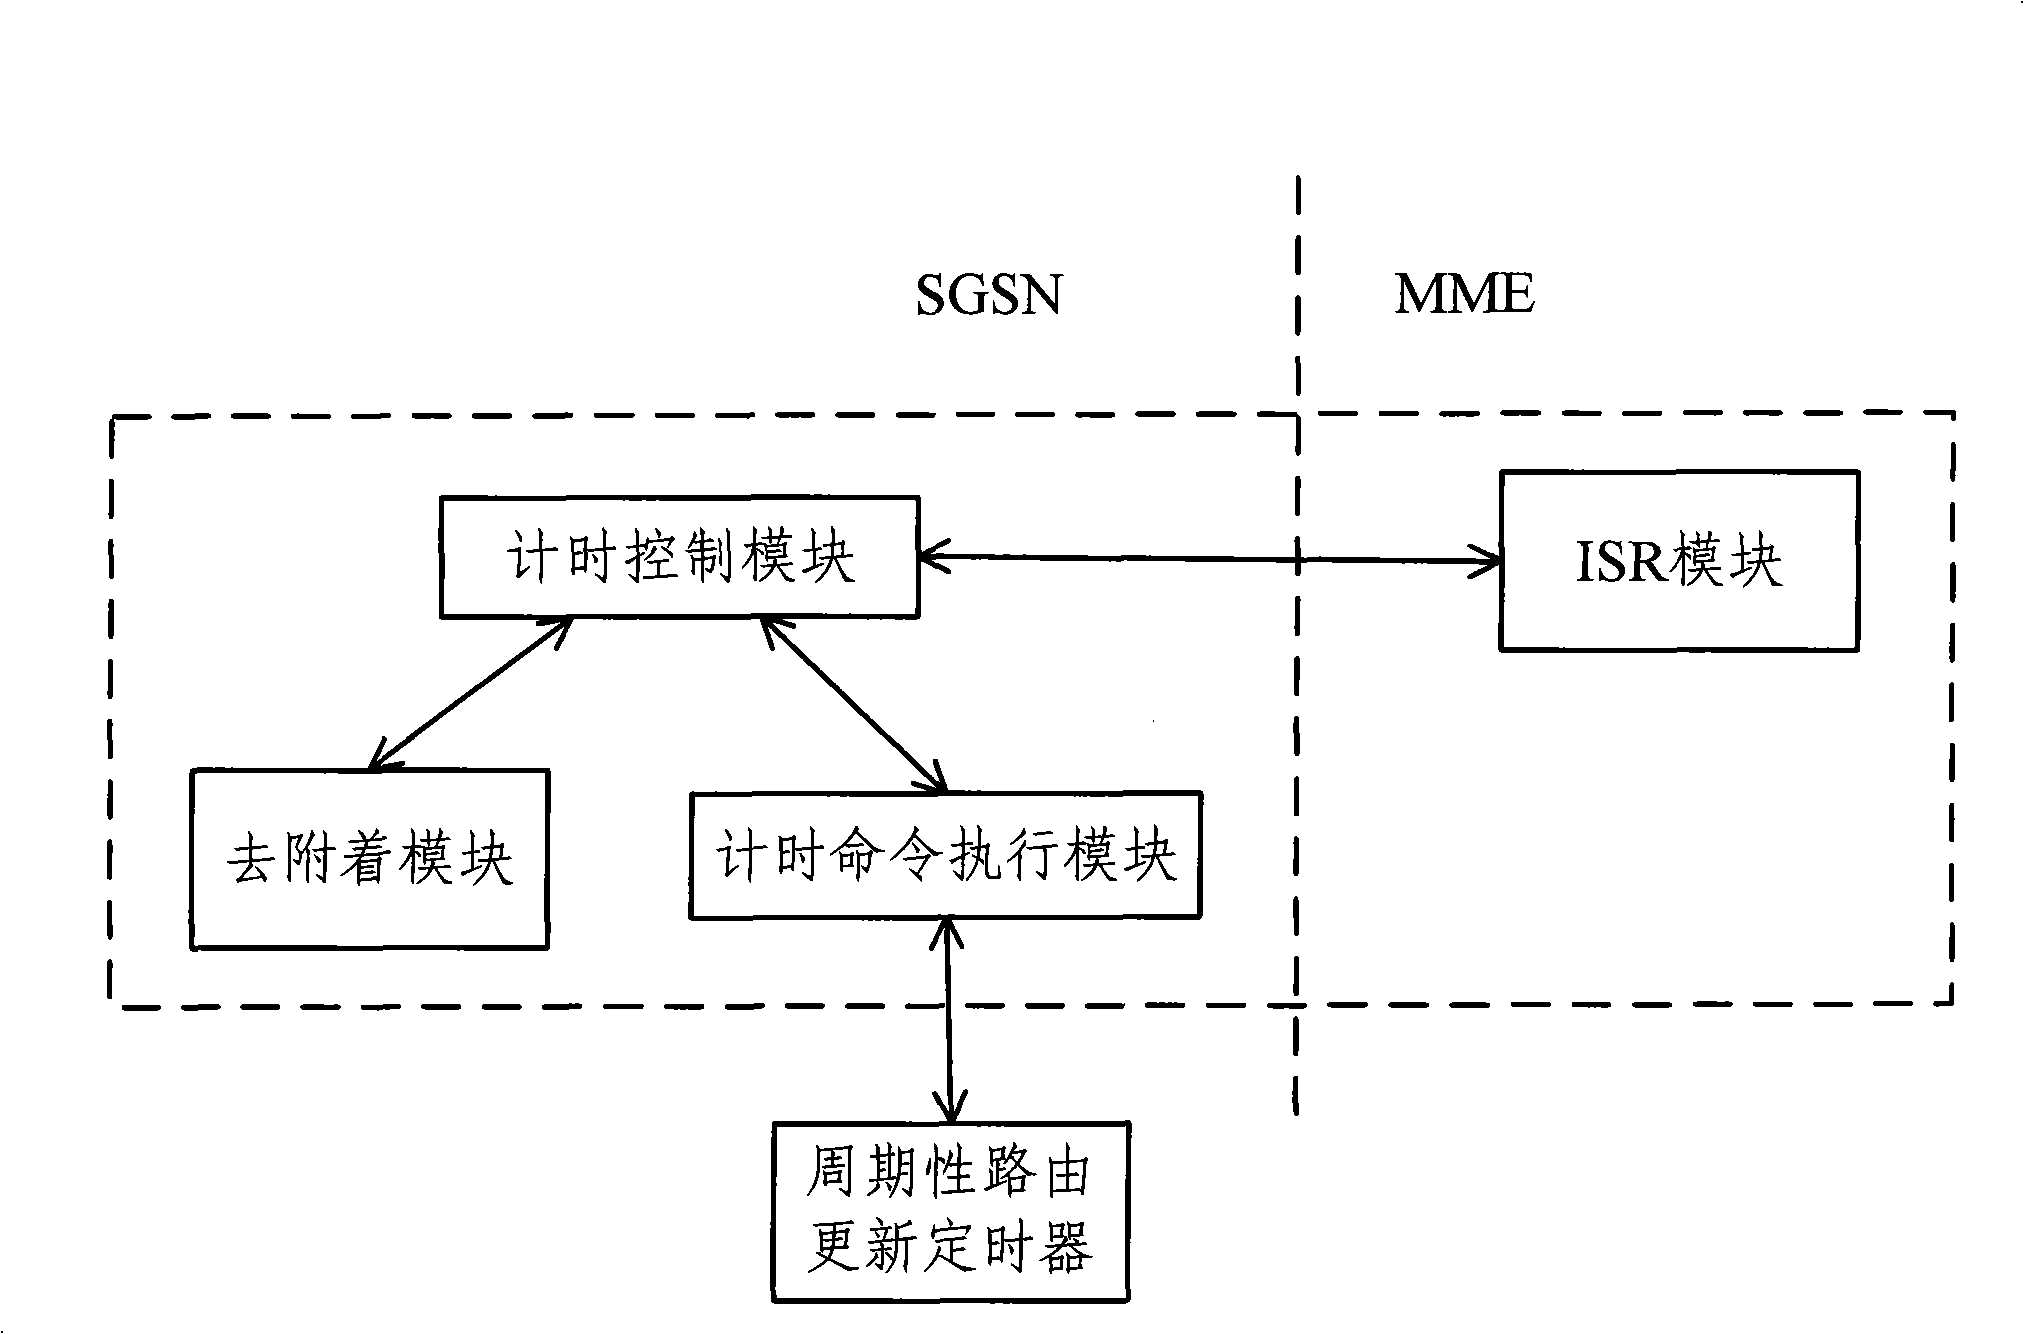 Method and apparatus for implementing signaling reduction in idle state with boundary-striding of user equipment